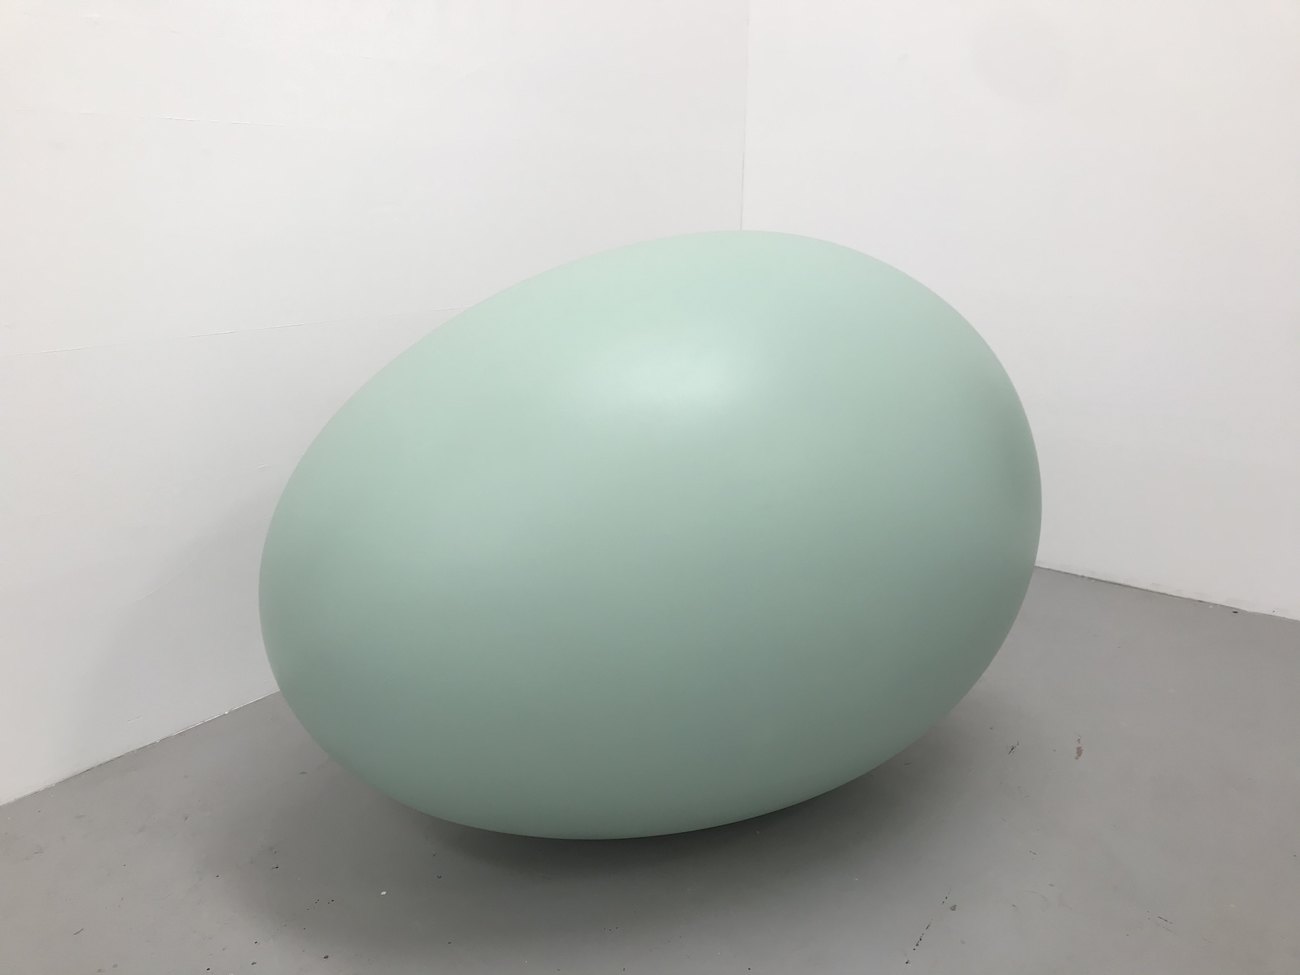 A large turquoise egg sculpture in the corner of a room